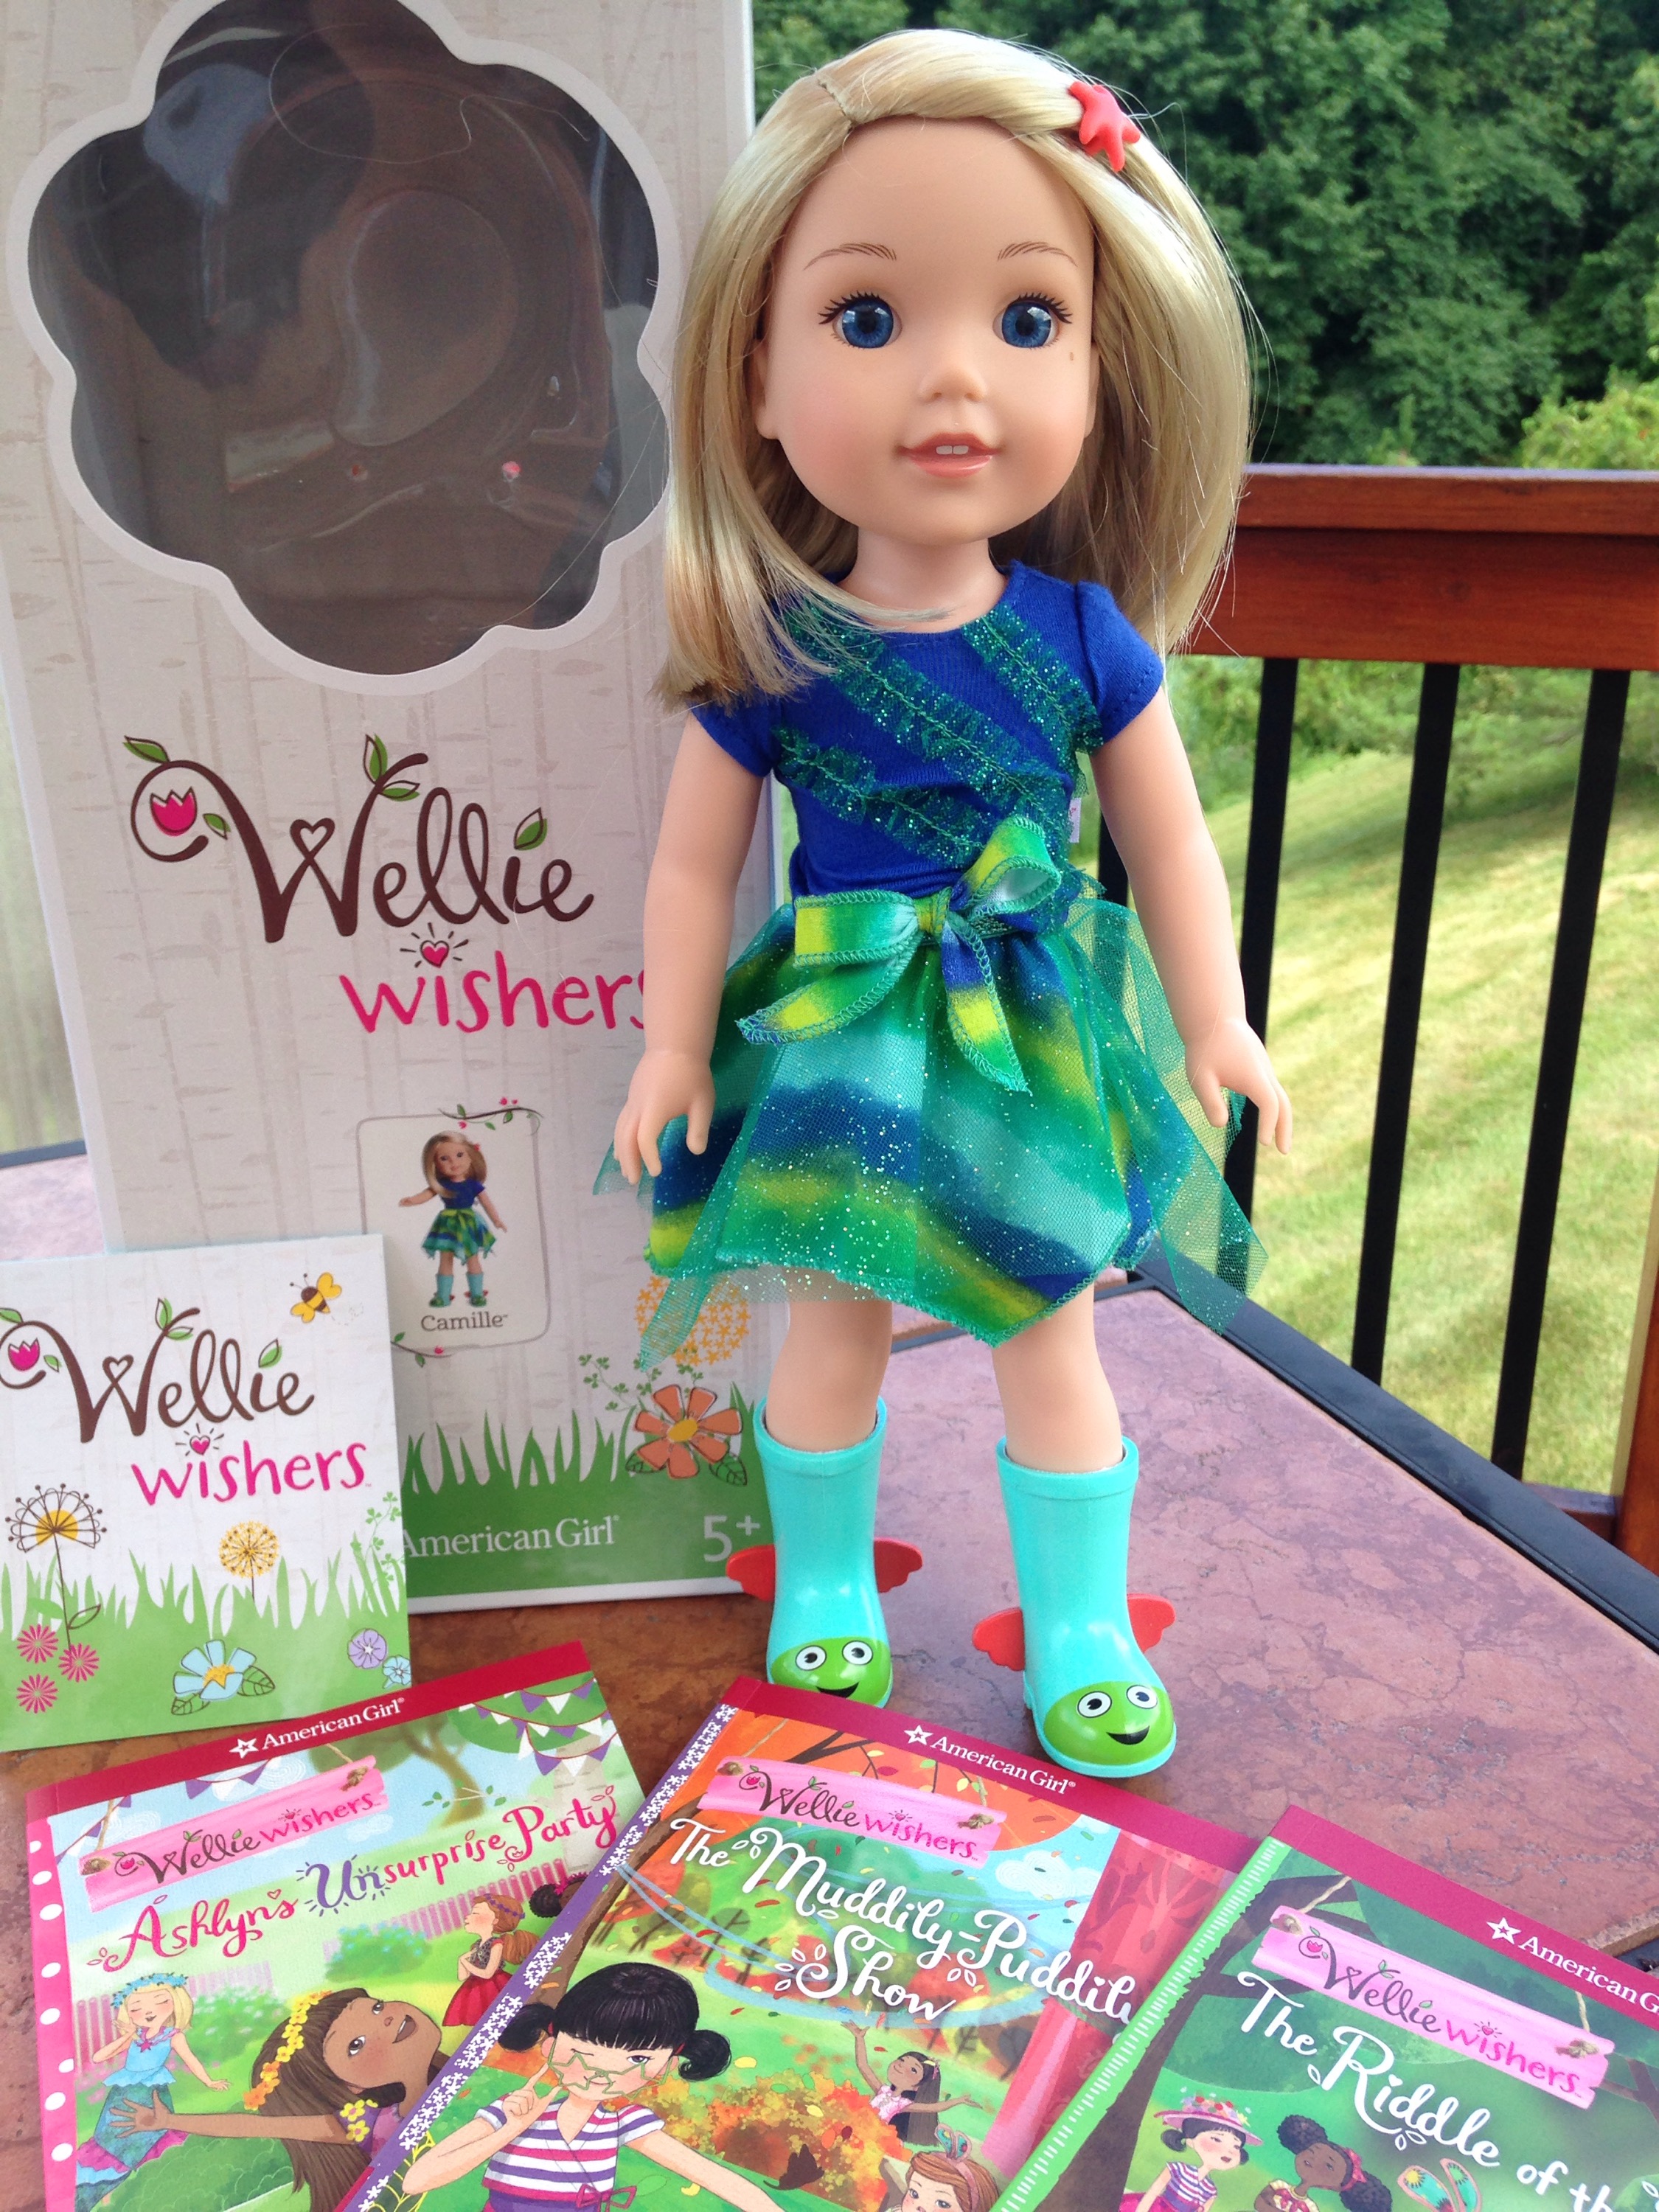 American Girl Wellie Wisher Camille Doll, doll clothing and books